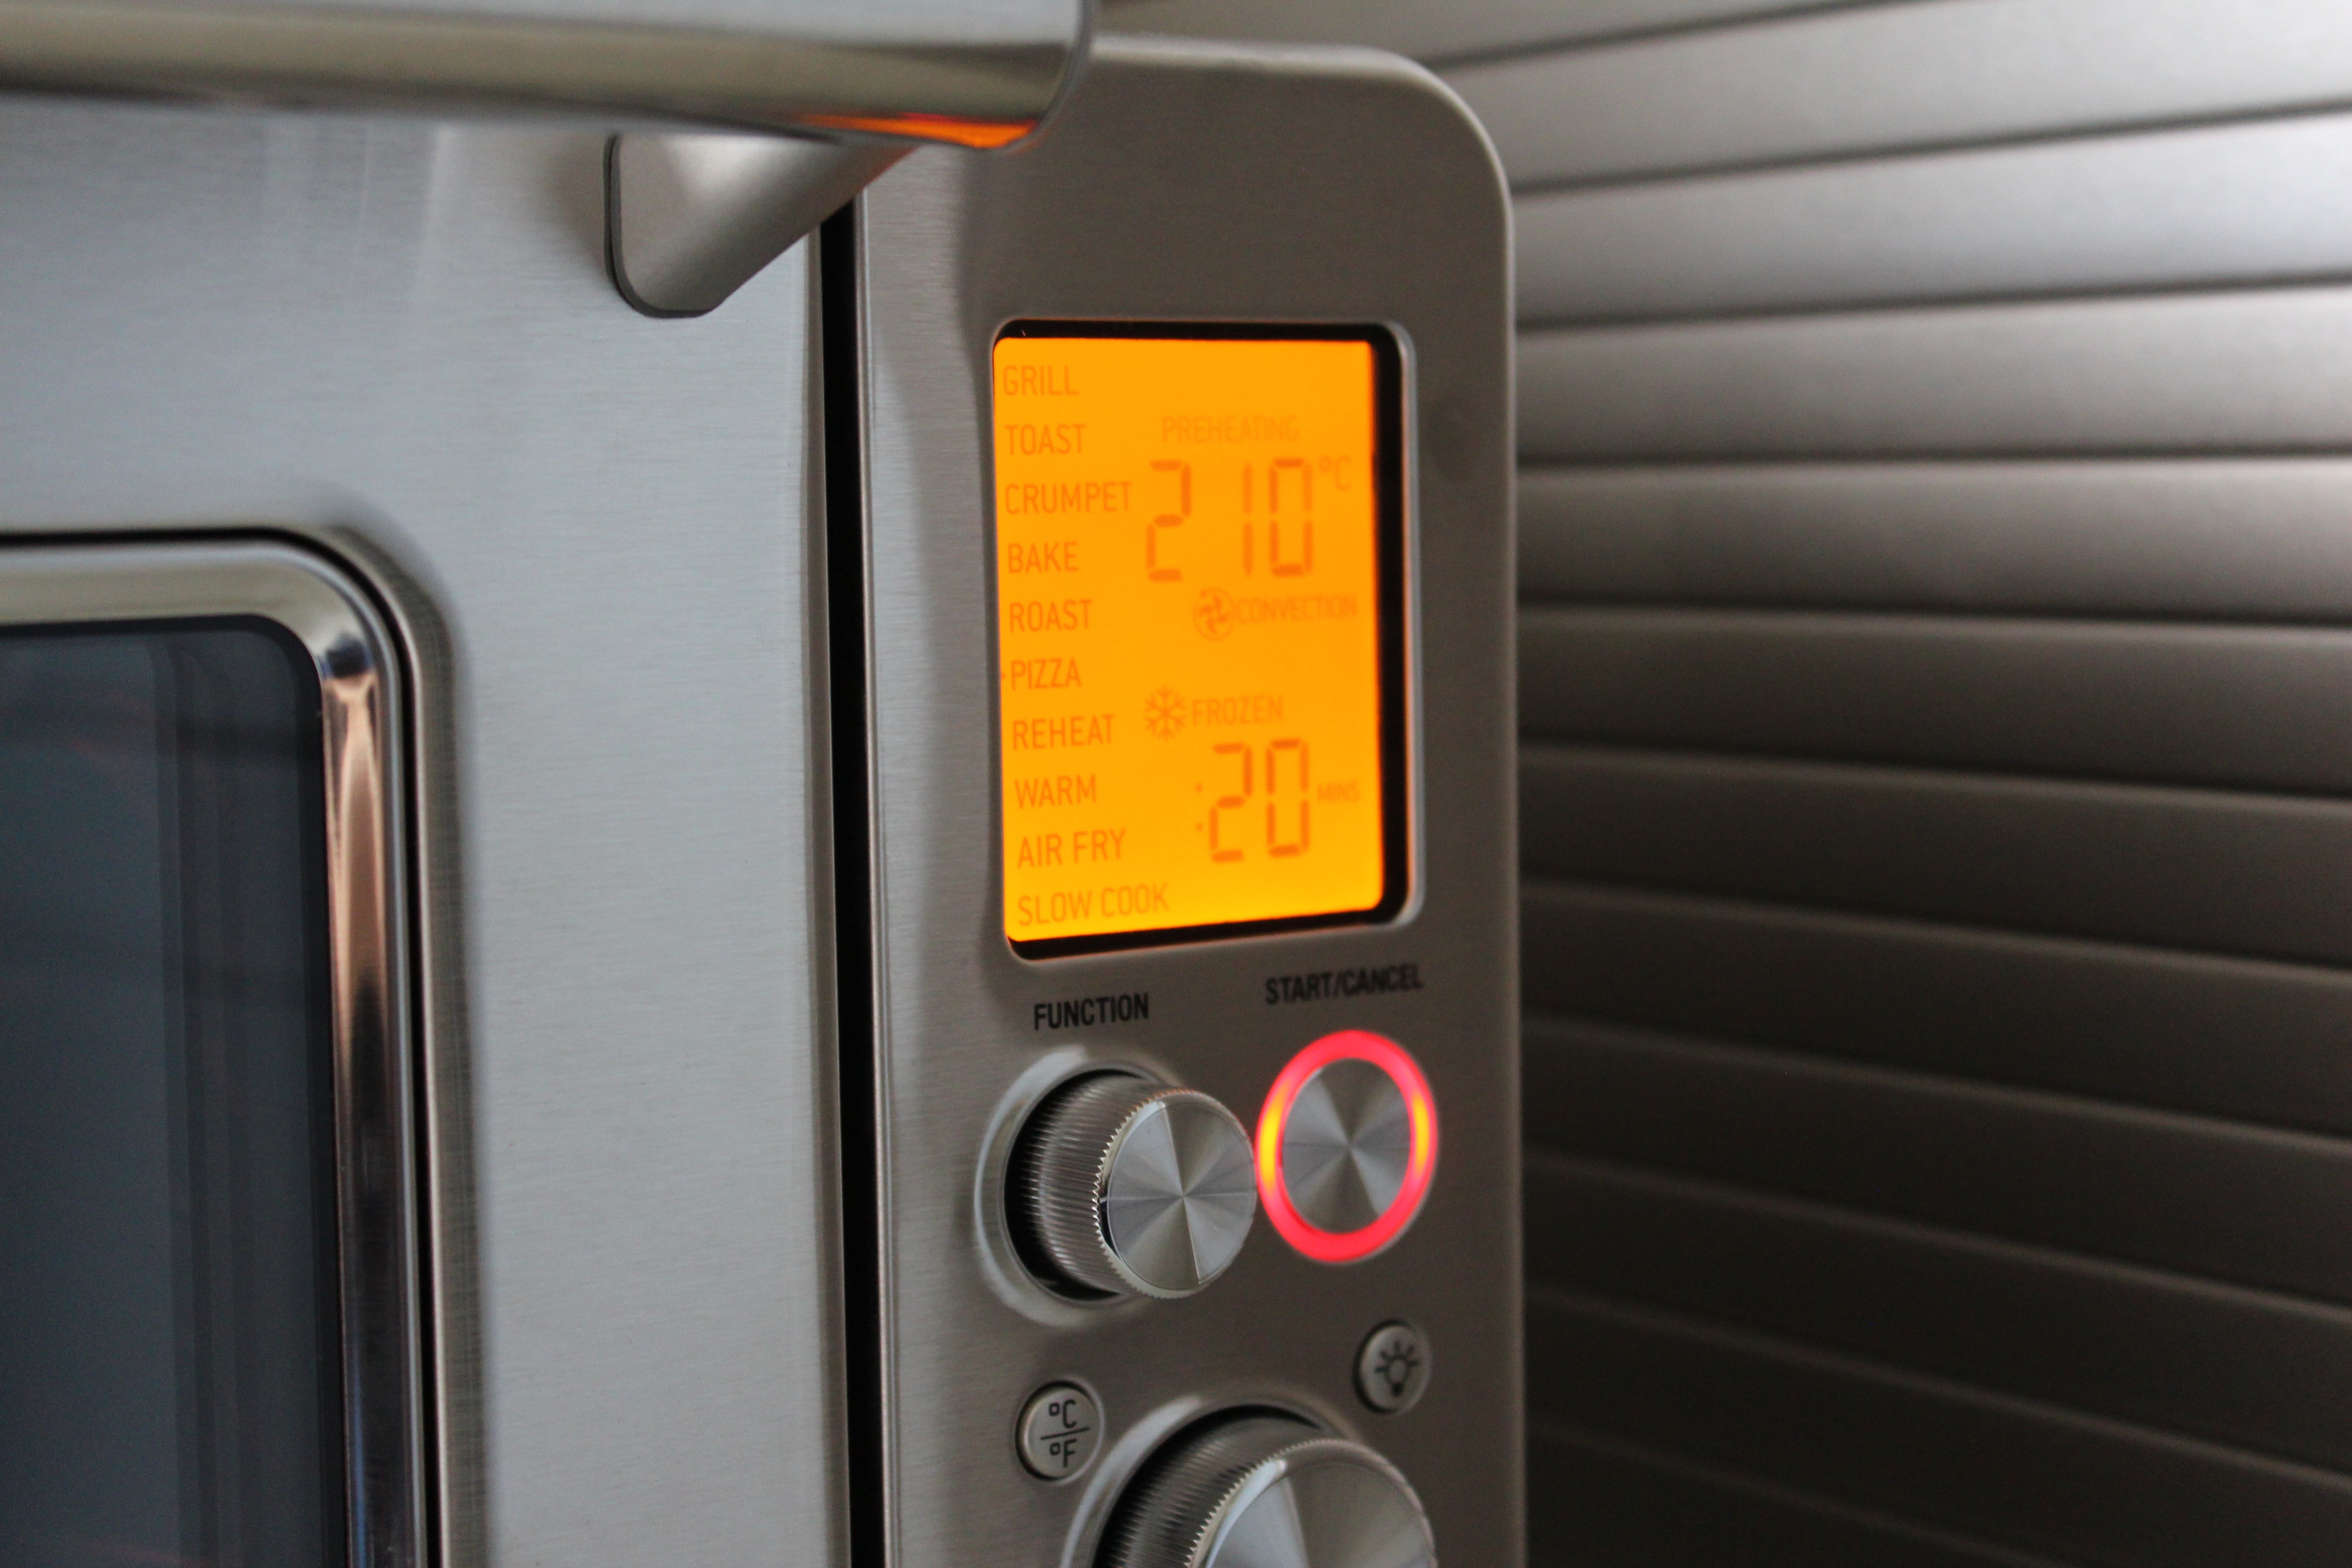 Sage the Smart Oven Air Fry temperature displayClose up view of small screen of a silver Sage the Smart Oven Air Fry